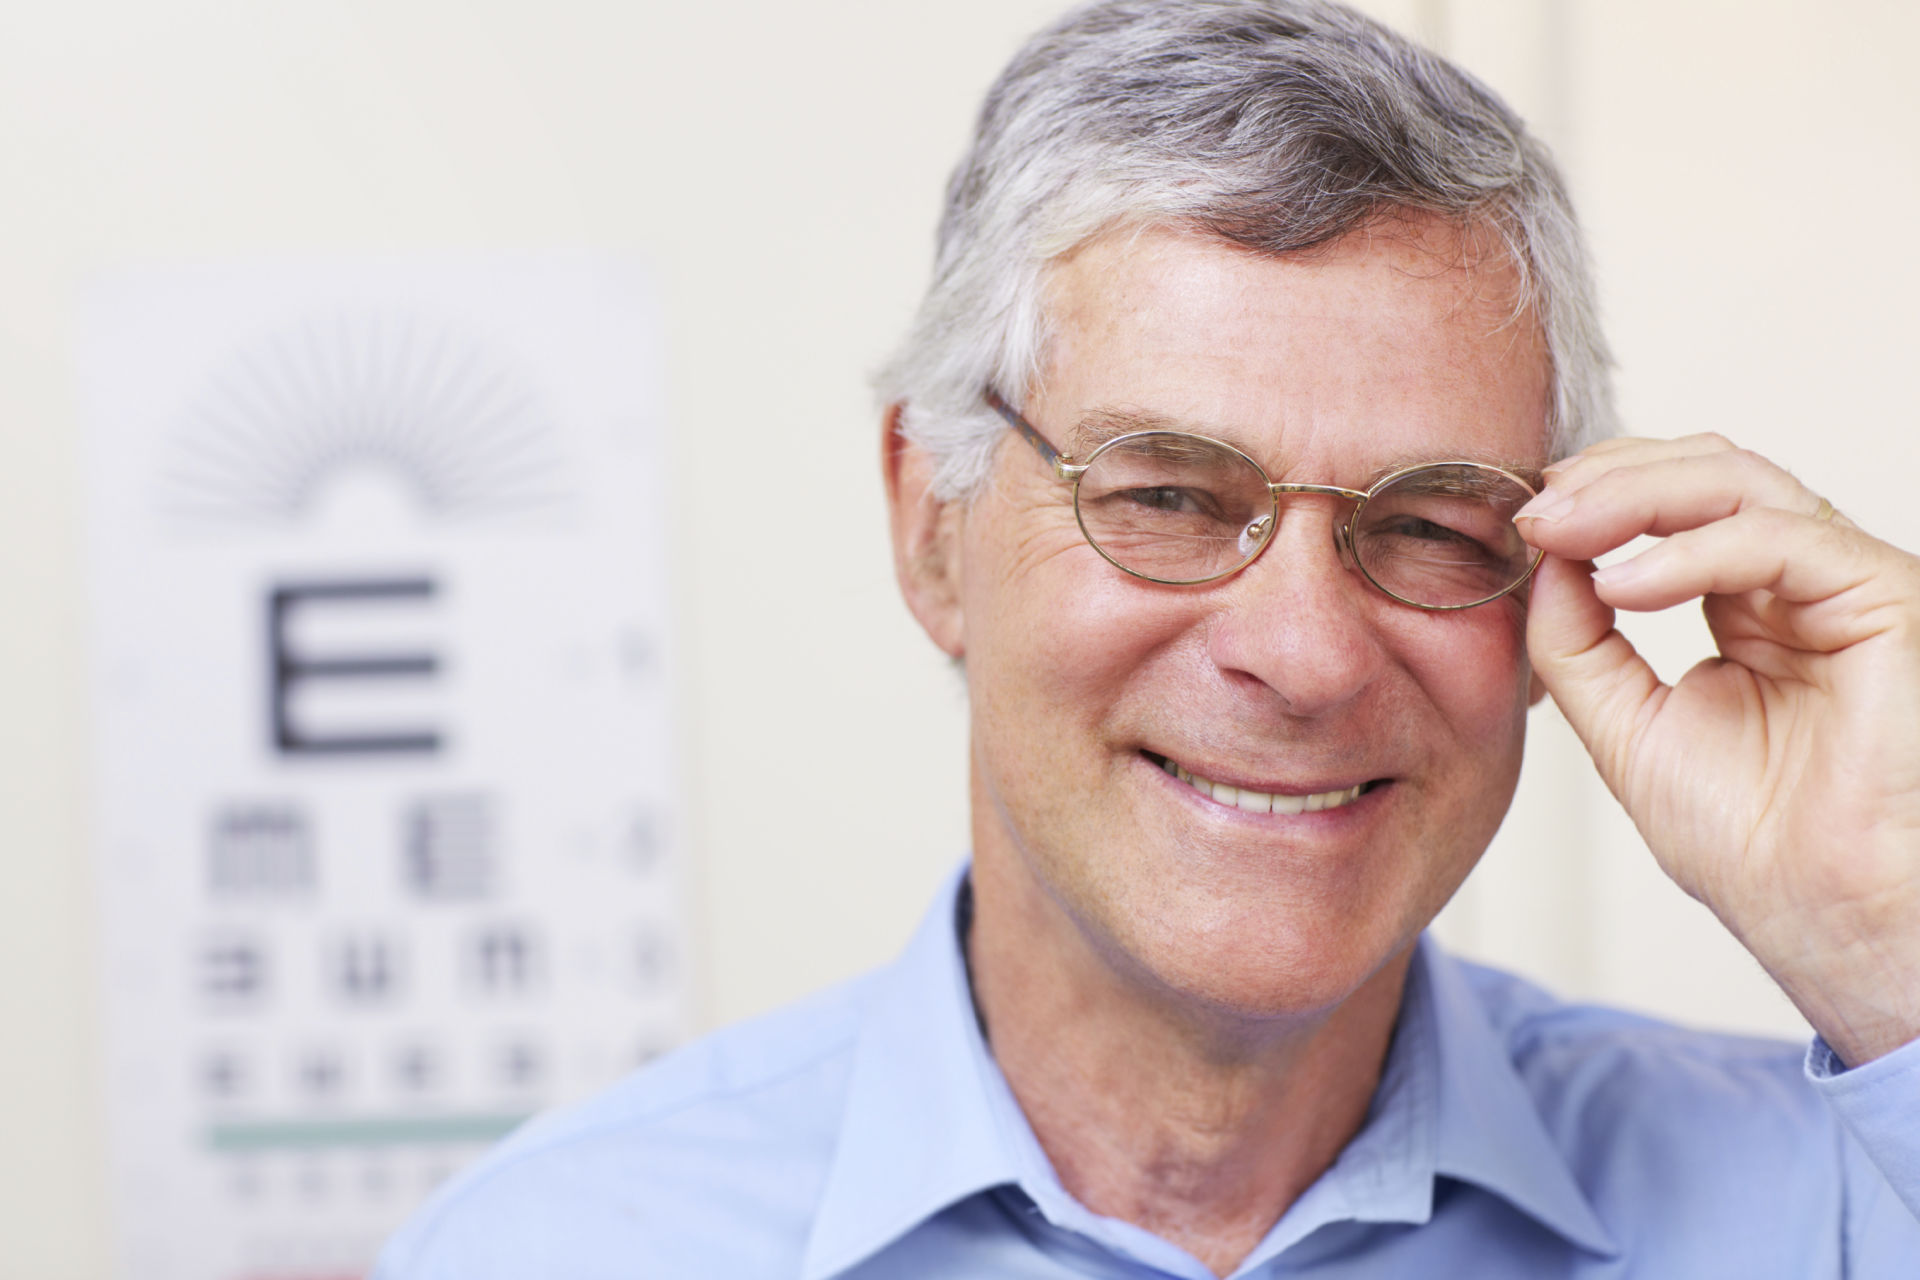 Introducing ICL-Implantable Contact Lenses now available at Eyesight Associates